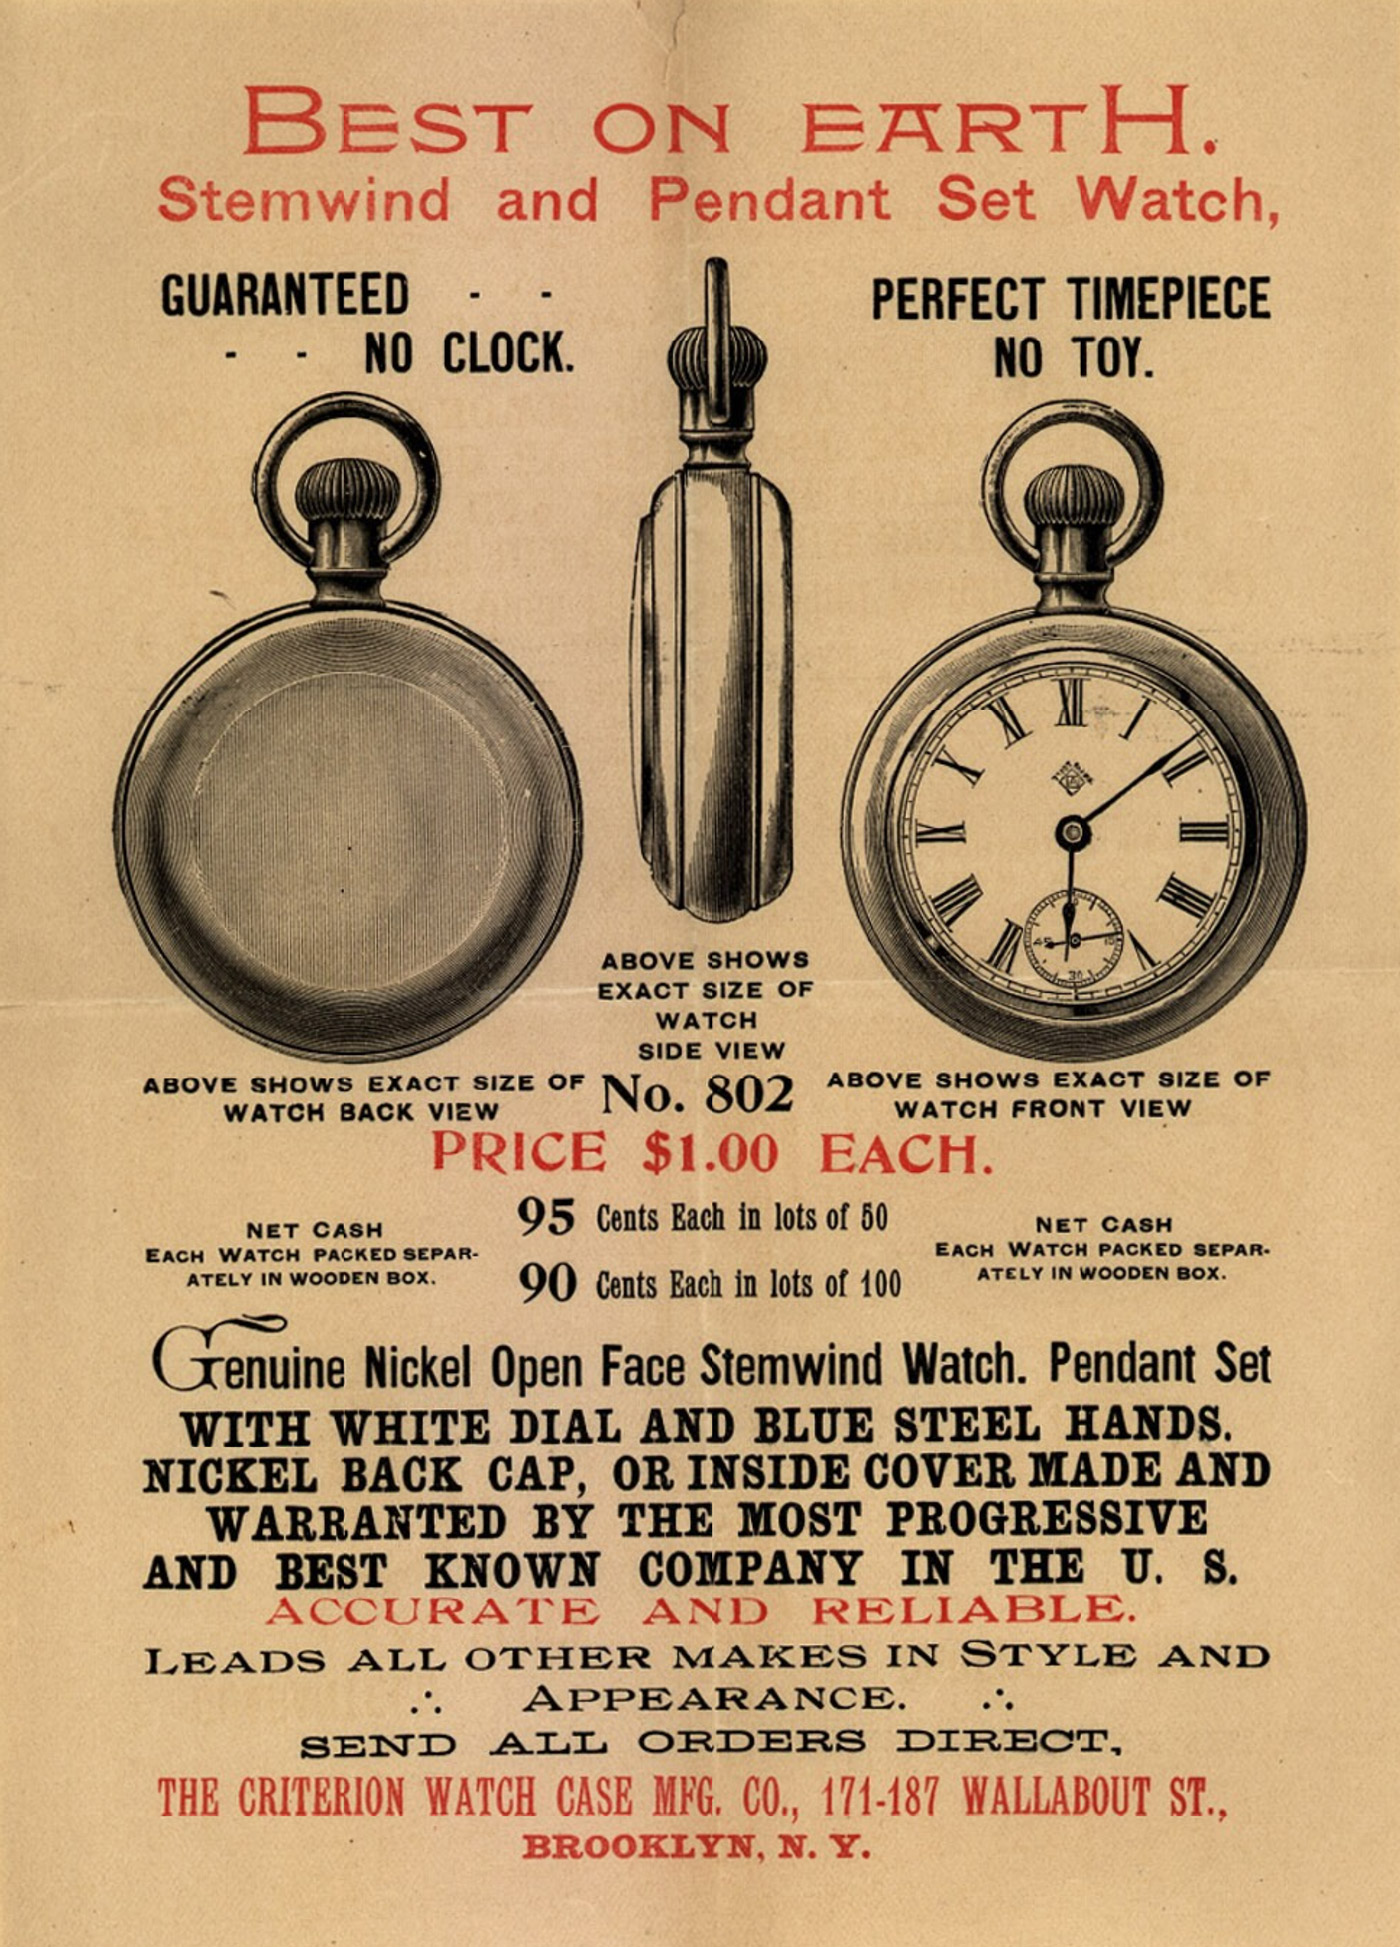 Criterion Watch Case Co. Image